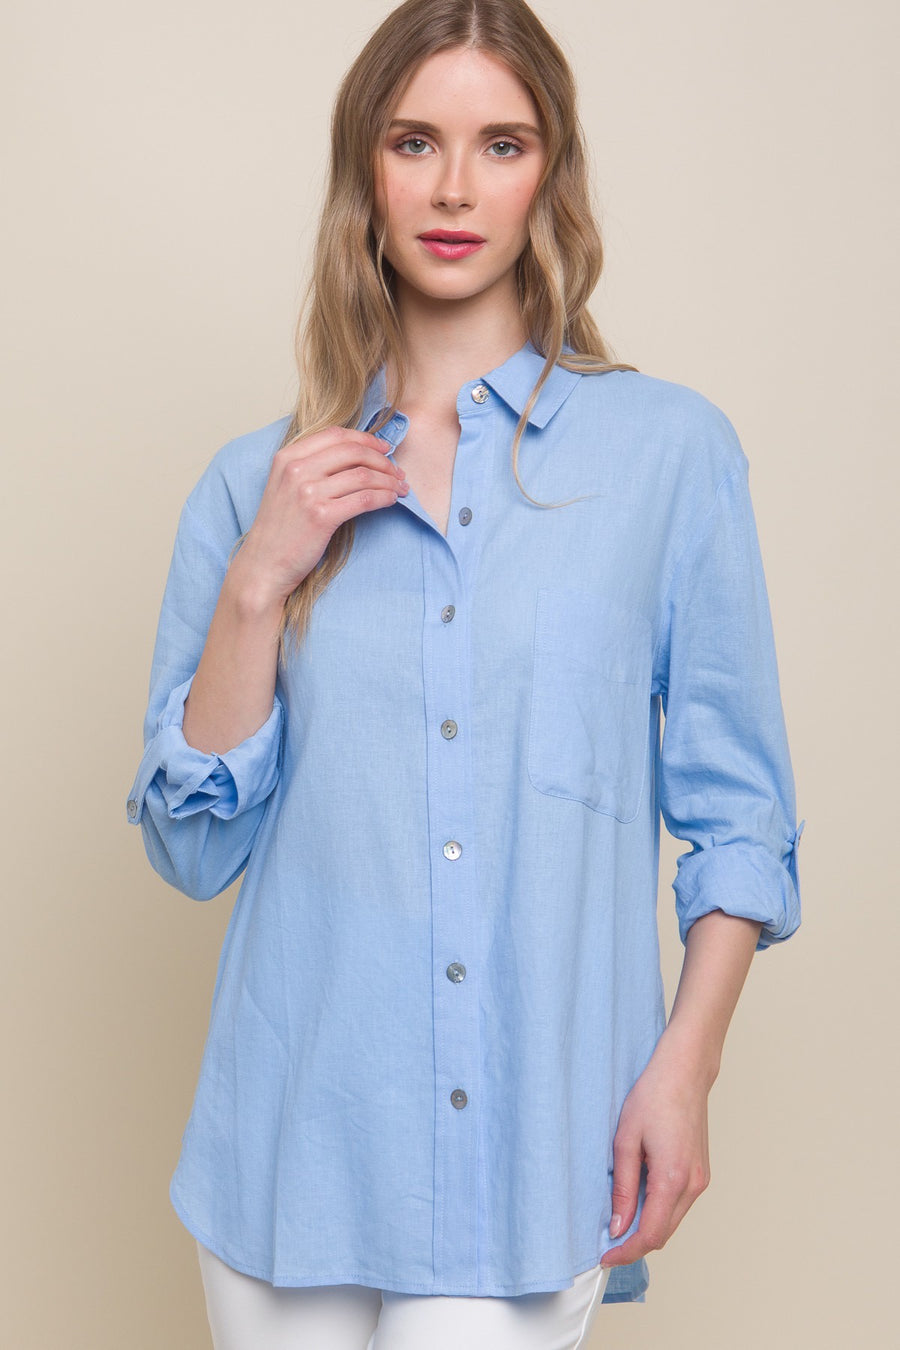 Long sleeve linen buttoned down shirt in the color light blue.